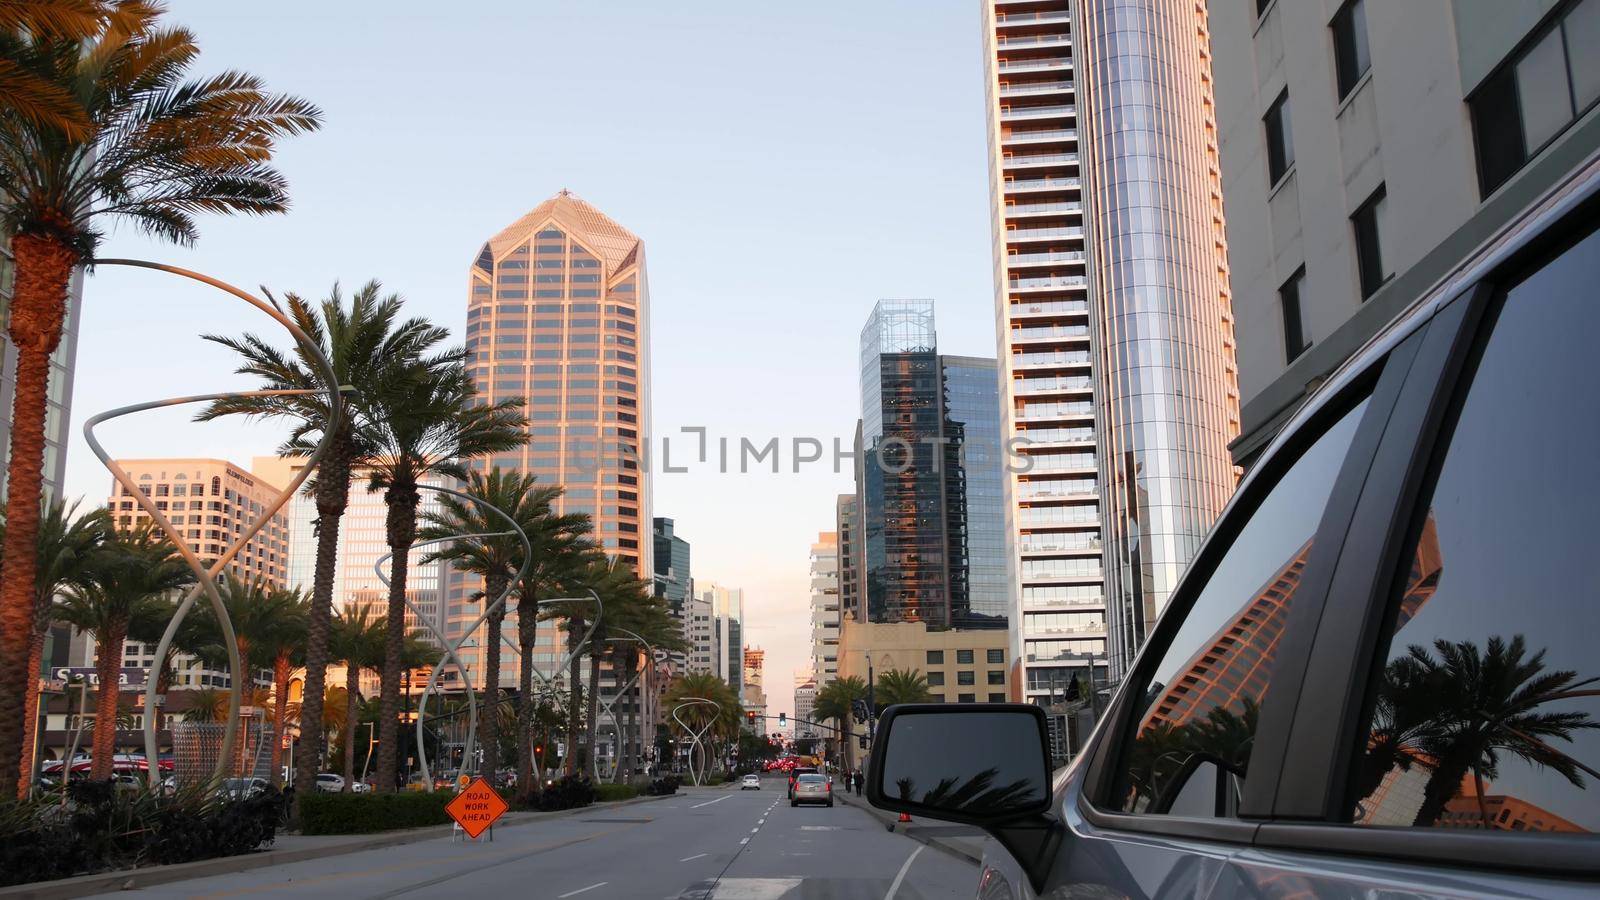 SAN DIEGO, CALIFORNIA USA - 13 FEB 2020: Pedestrians, traffic and highrise buildings in city downtown. Street life of american metropolis. Urban Broadway street, transport and citizens near Santa Fe.